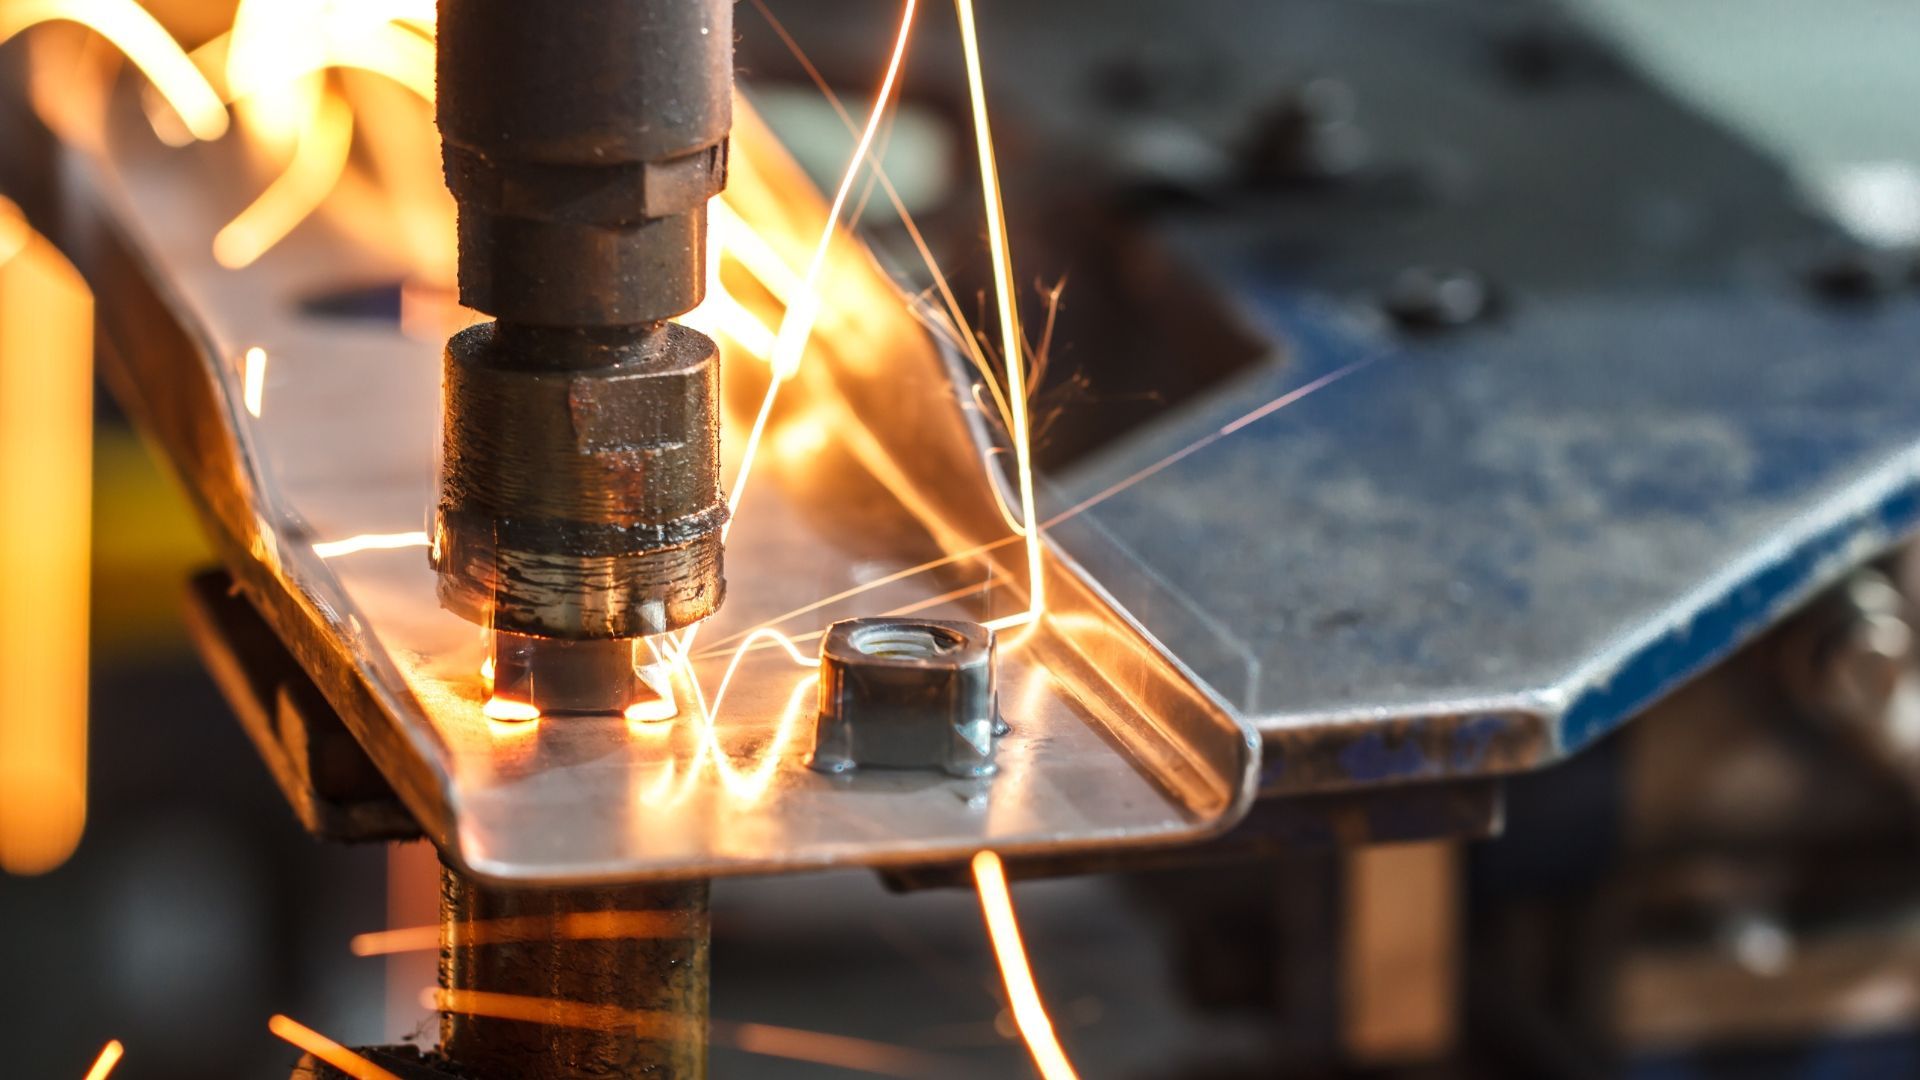 A machine is cutting a piece of metal with sparks coming out of it.